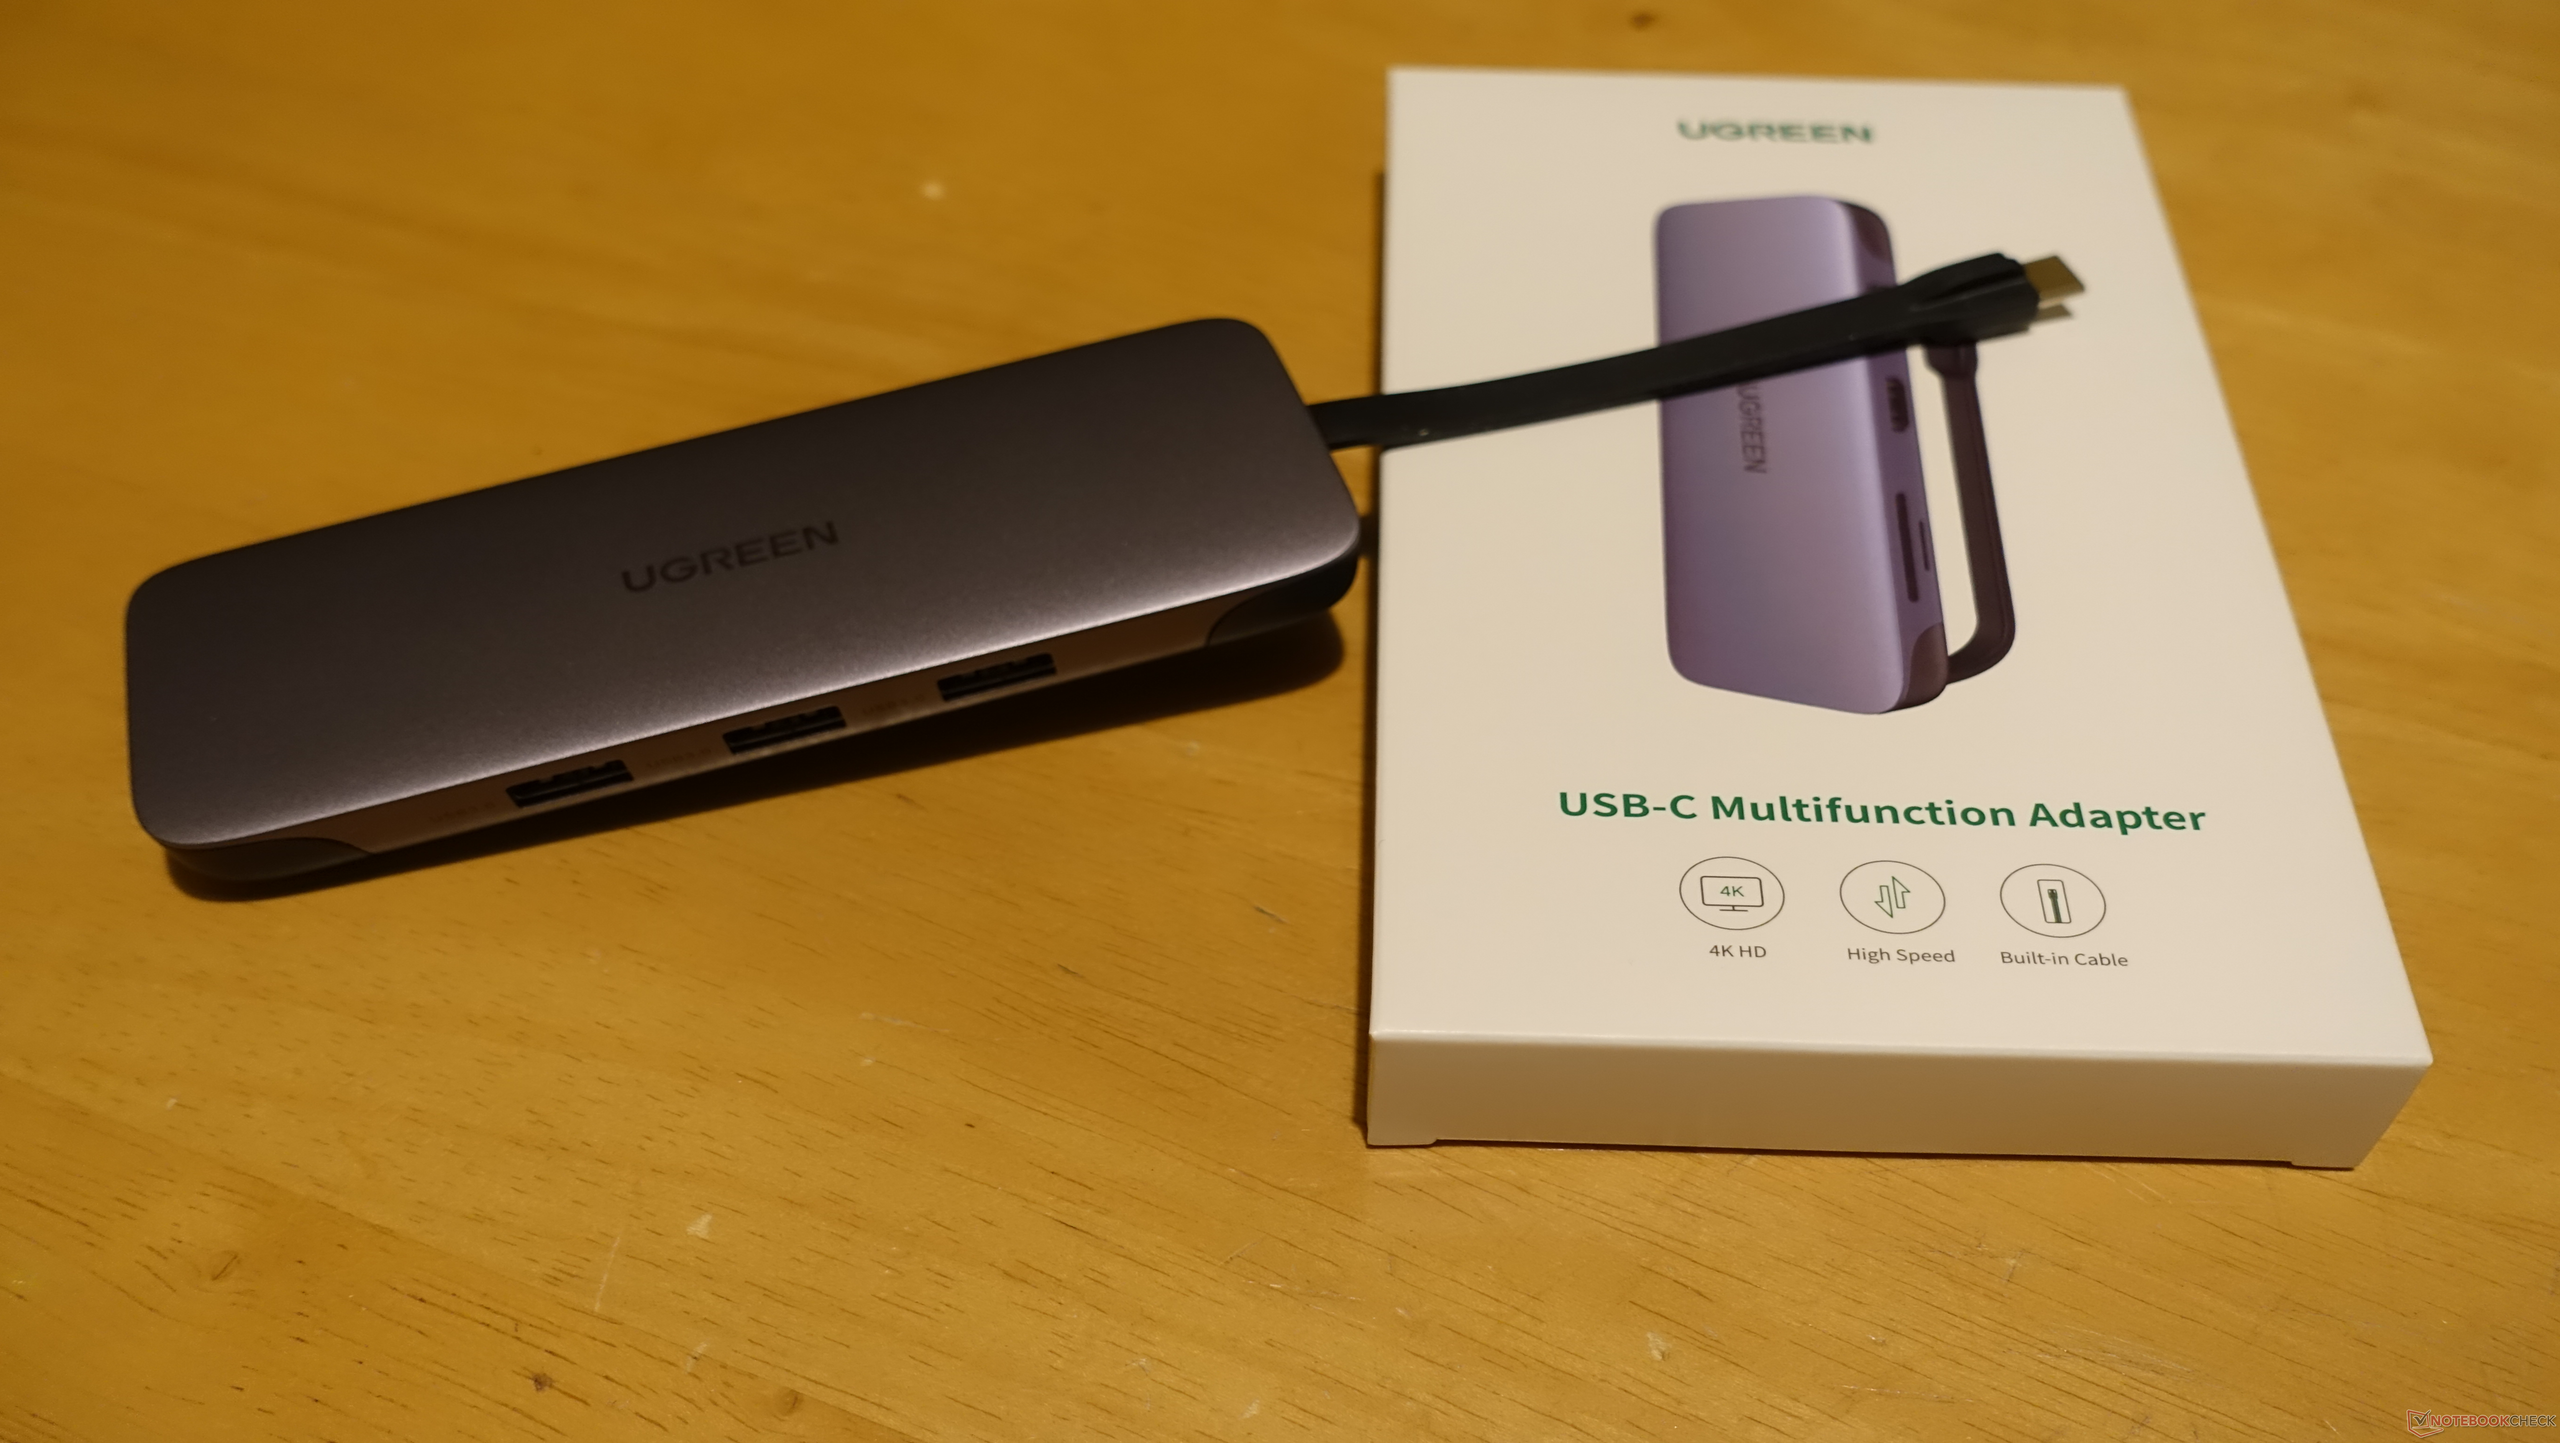 UGreen USB-C 6 in 1 Multi-function Adapter Unboxing and Review